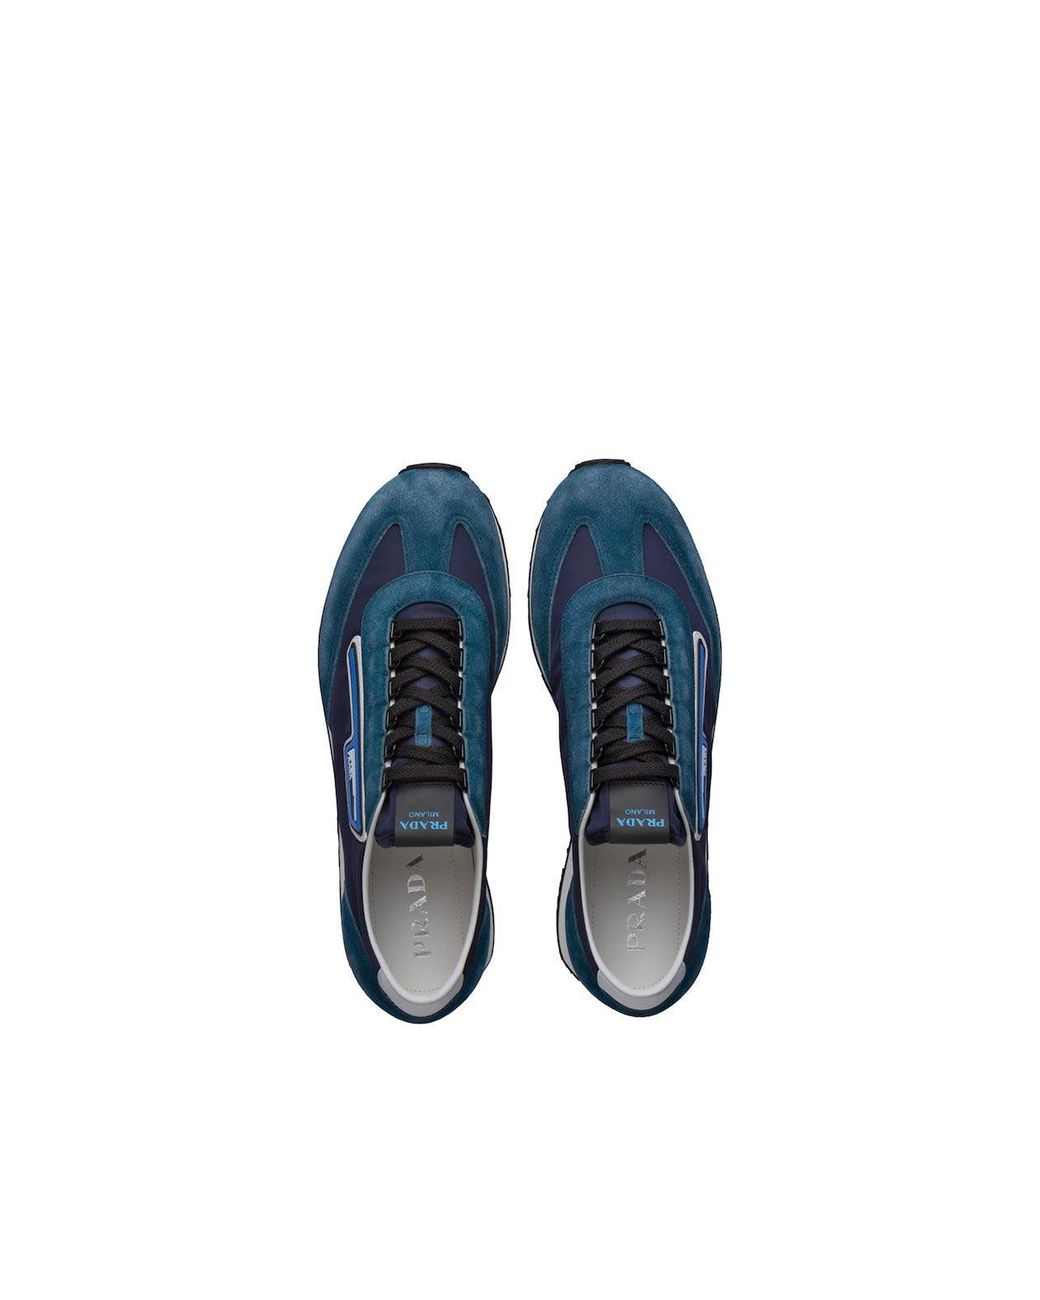 Prada 2eg276-3kuy Shoes Cloudbust Technical Fabric / Suede Leather Casual  Sneakers (prm1016) in Blue for Men | Lyst